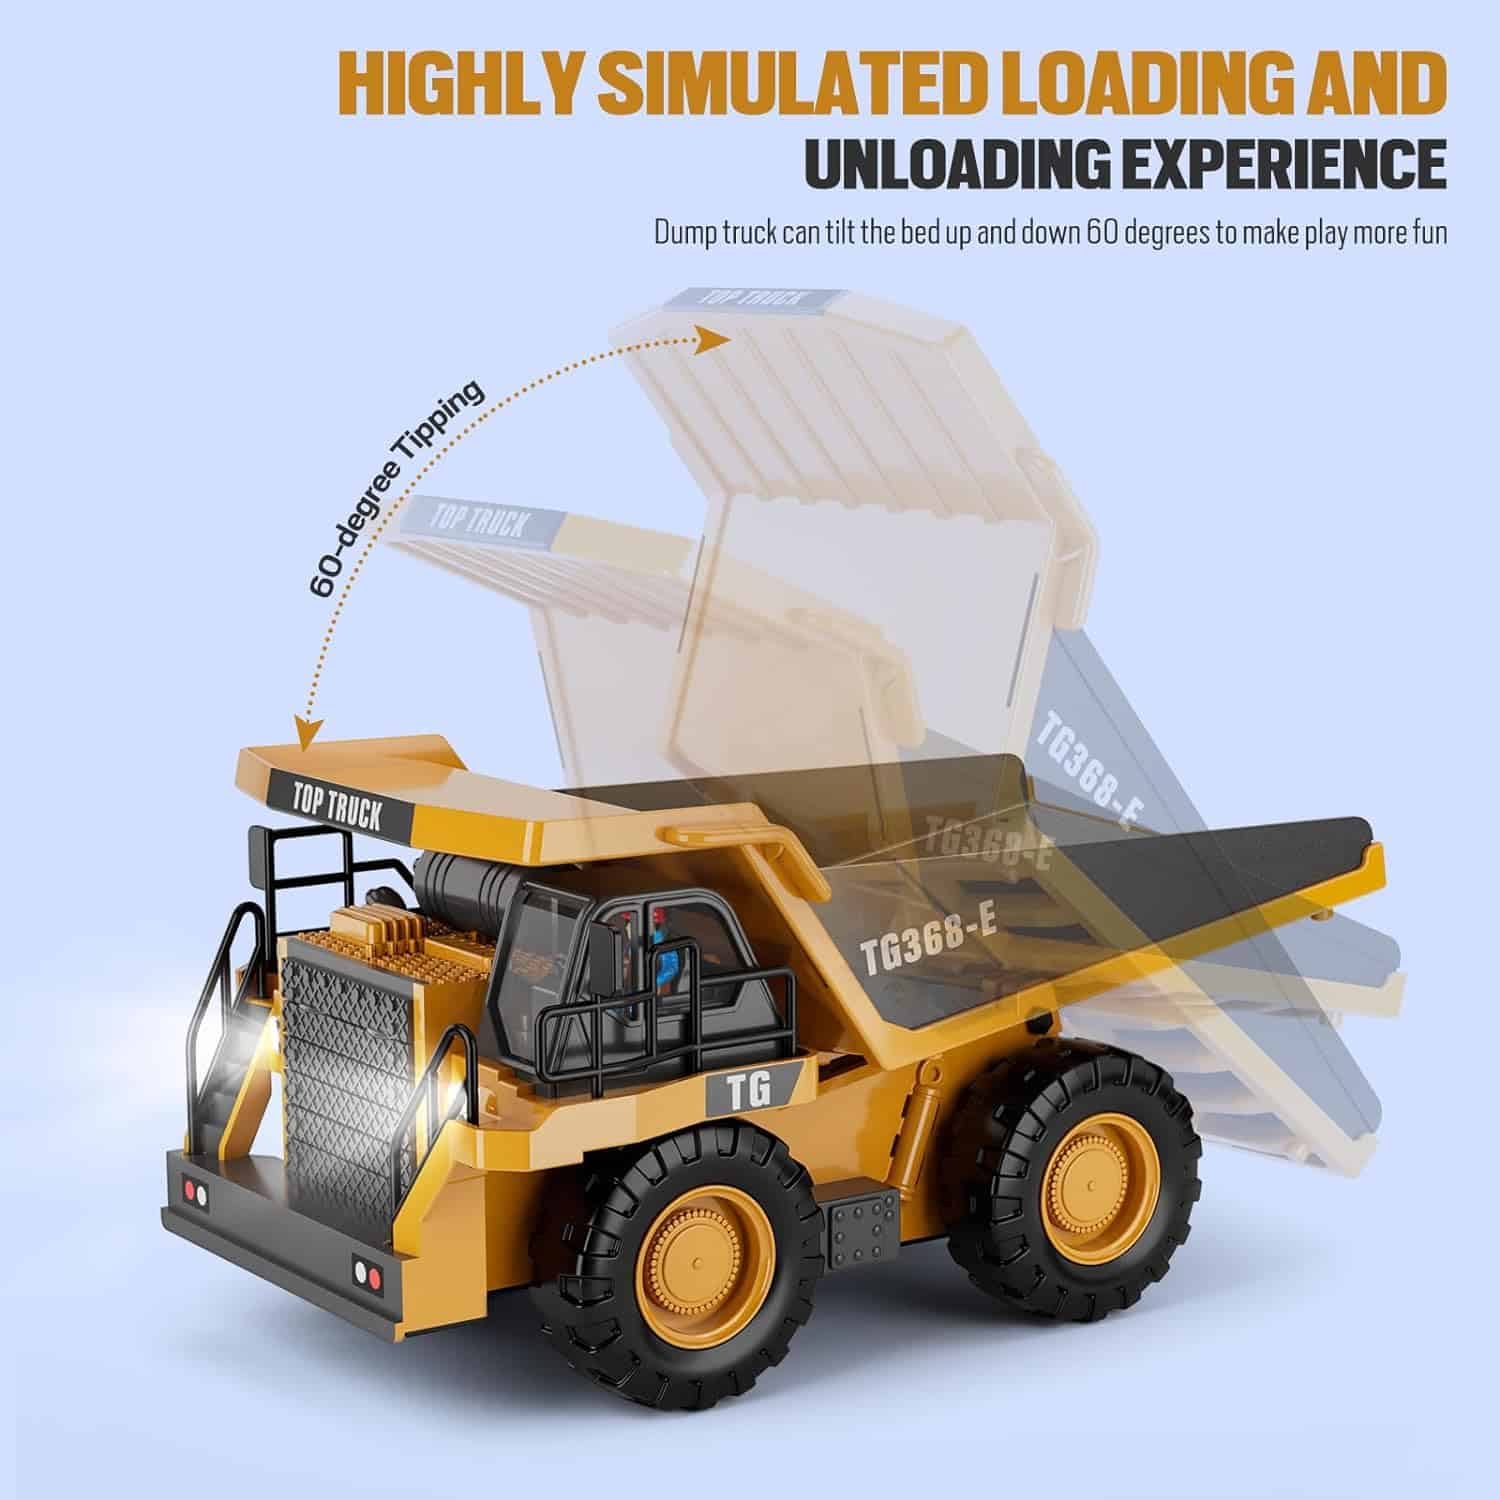 2FUN RC Dump Truck Toy: The Ultimate Remote Control Construction Vehicle for Endless Adventures